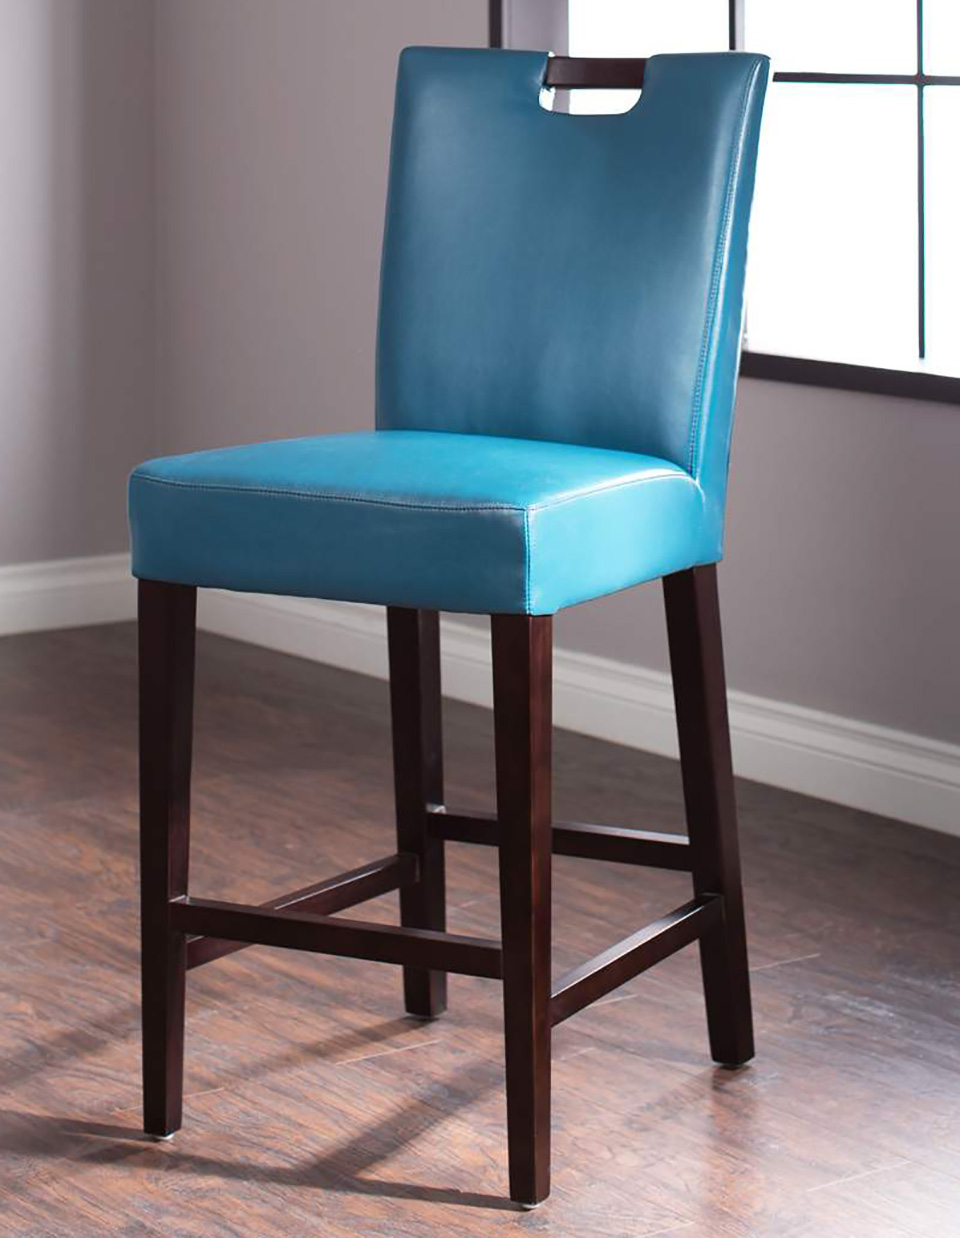 The Right Height Jerome S Furniture, Teal Leather Bar Chairs